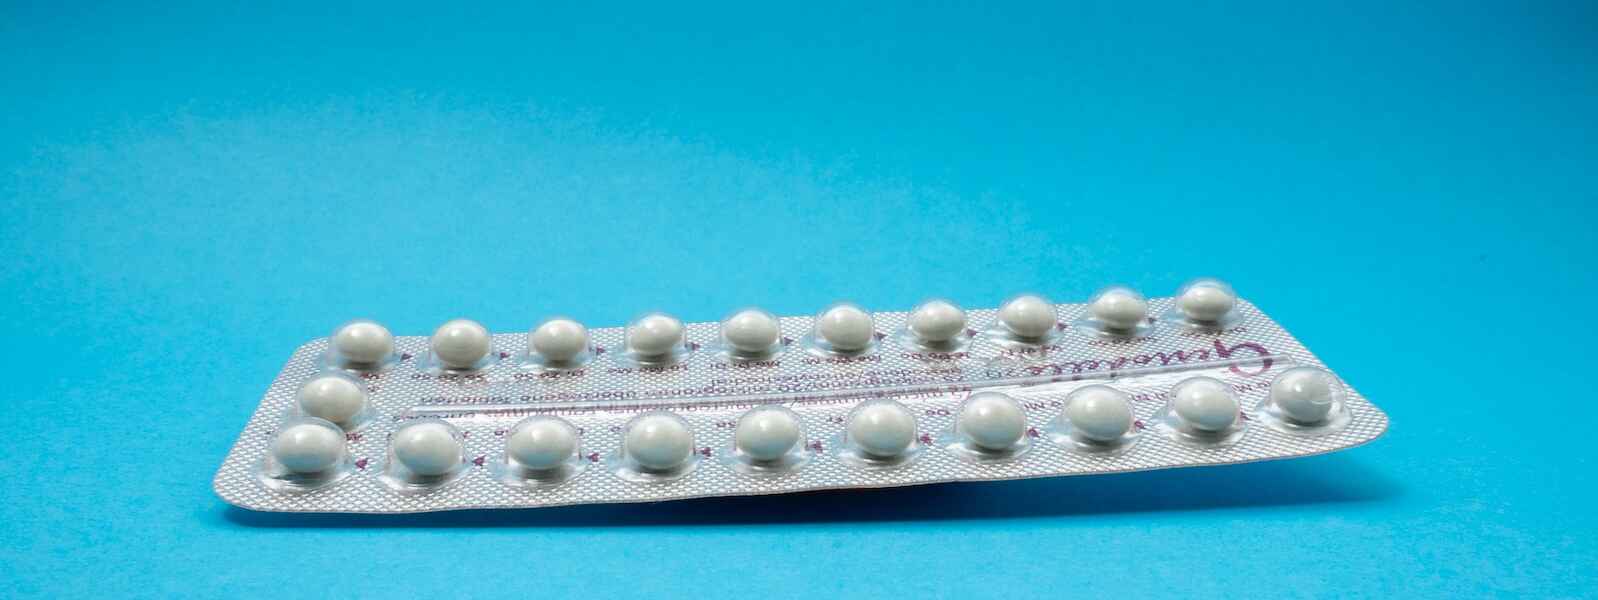 oral contraceptive pill package on a blue backdrop